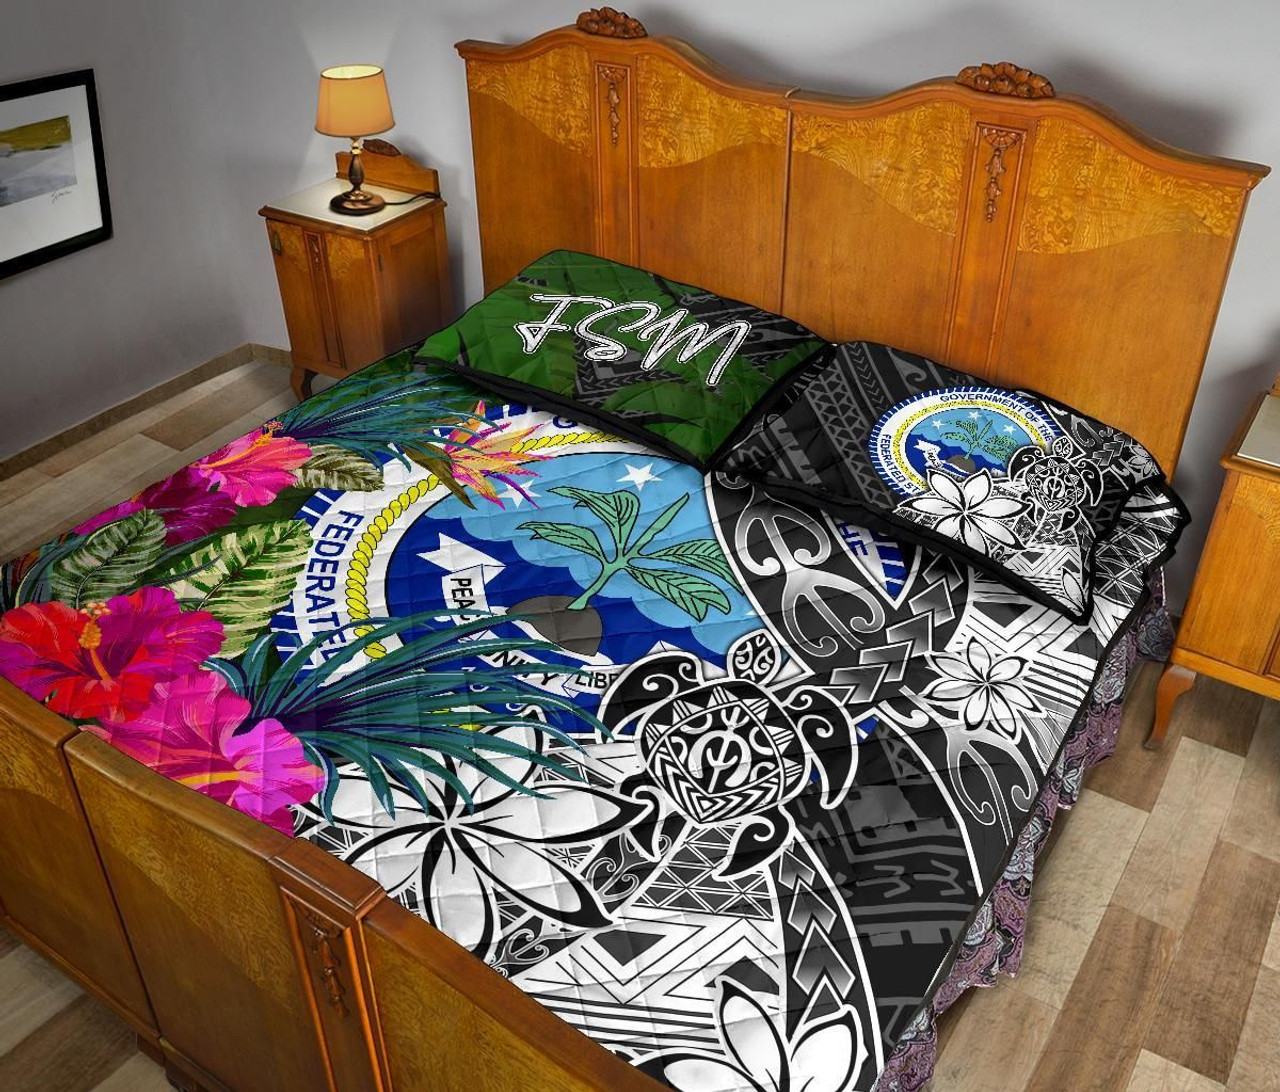 Federated States of Micronesia Quilt Bed Set - Turtle Plumeria Banana Leaf 4